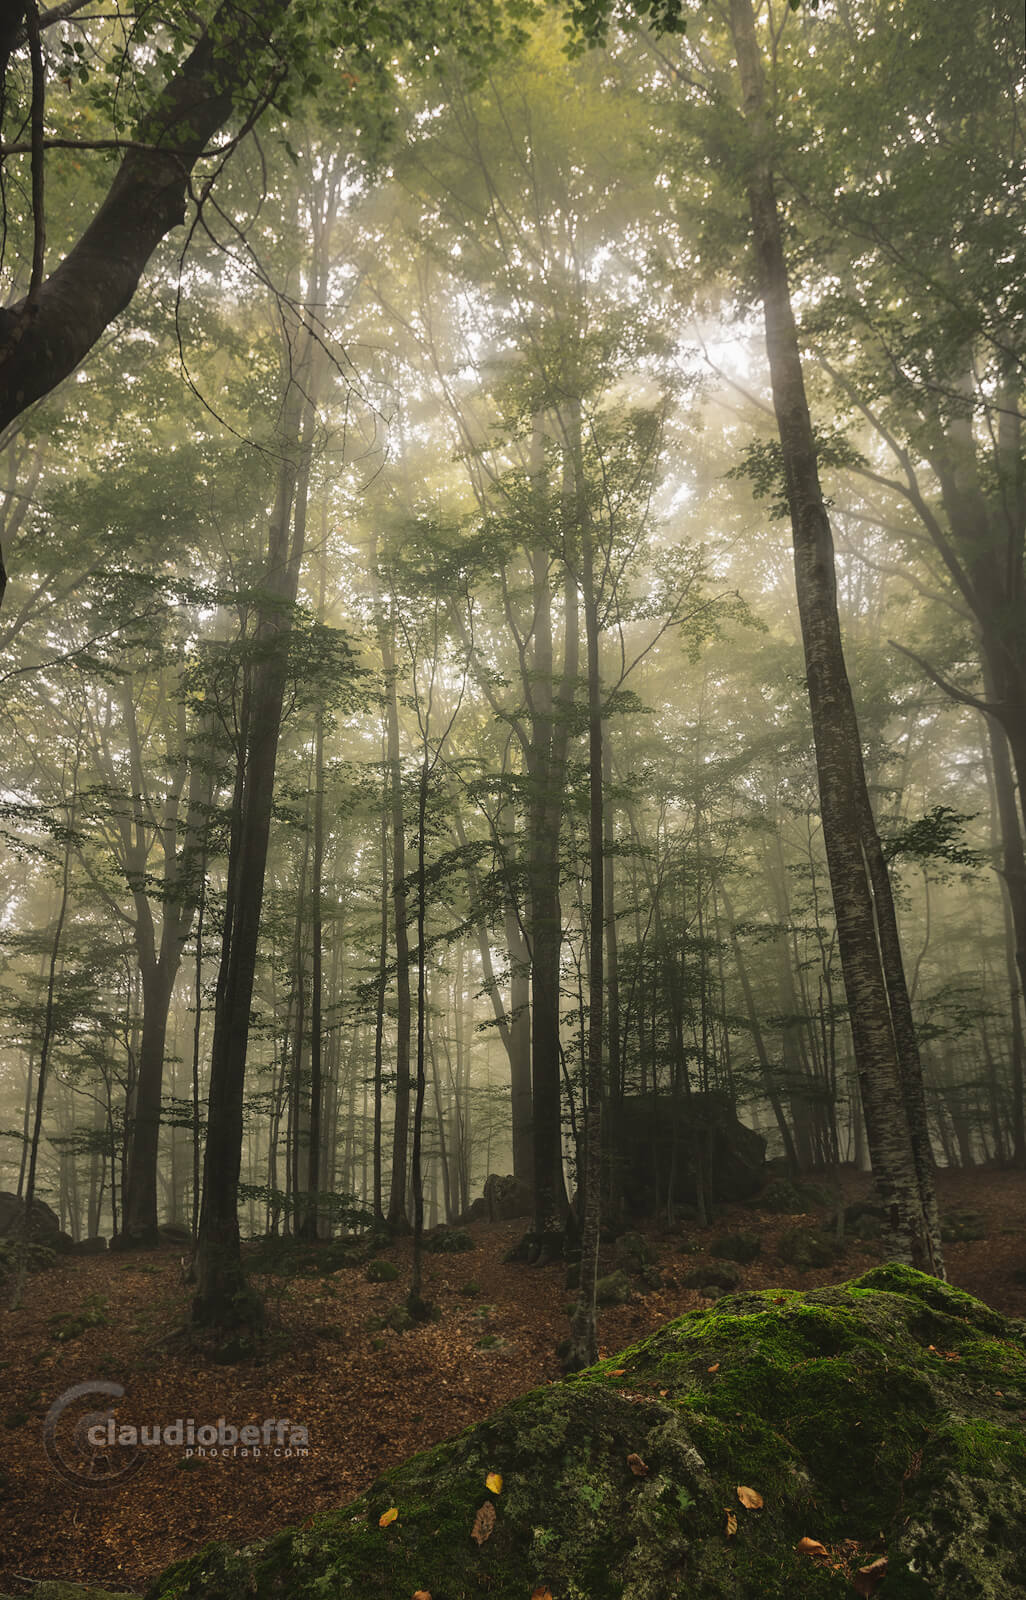 Forest, Mist, Fog, Light, Green, Mout Amiata, Ancient, Italy, Tuscany, Forest of Mount Amiata